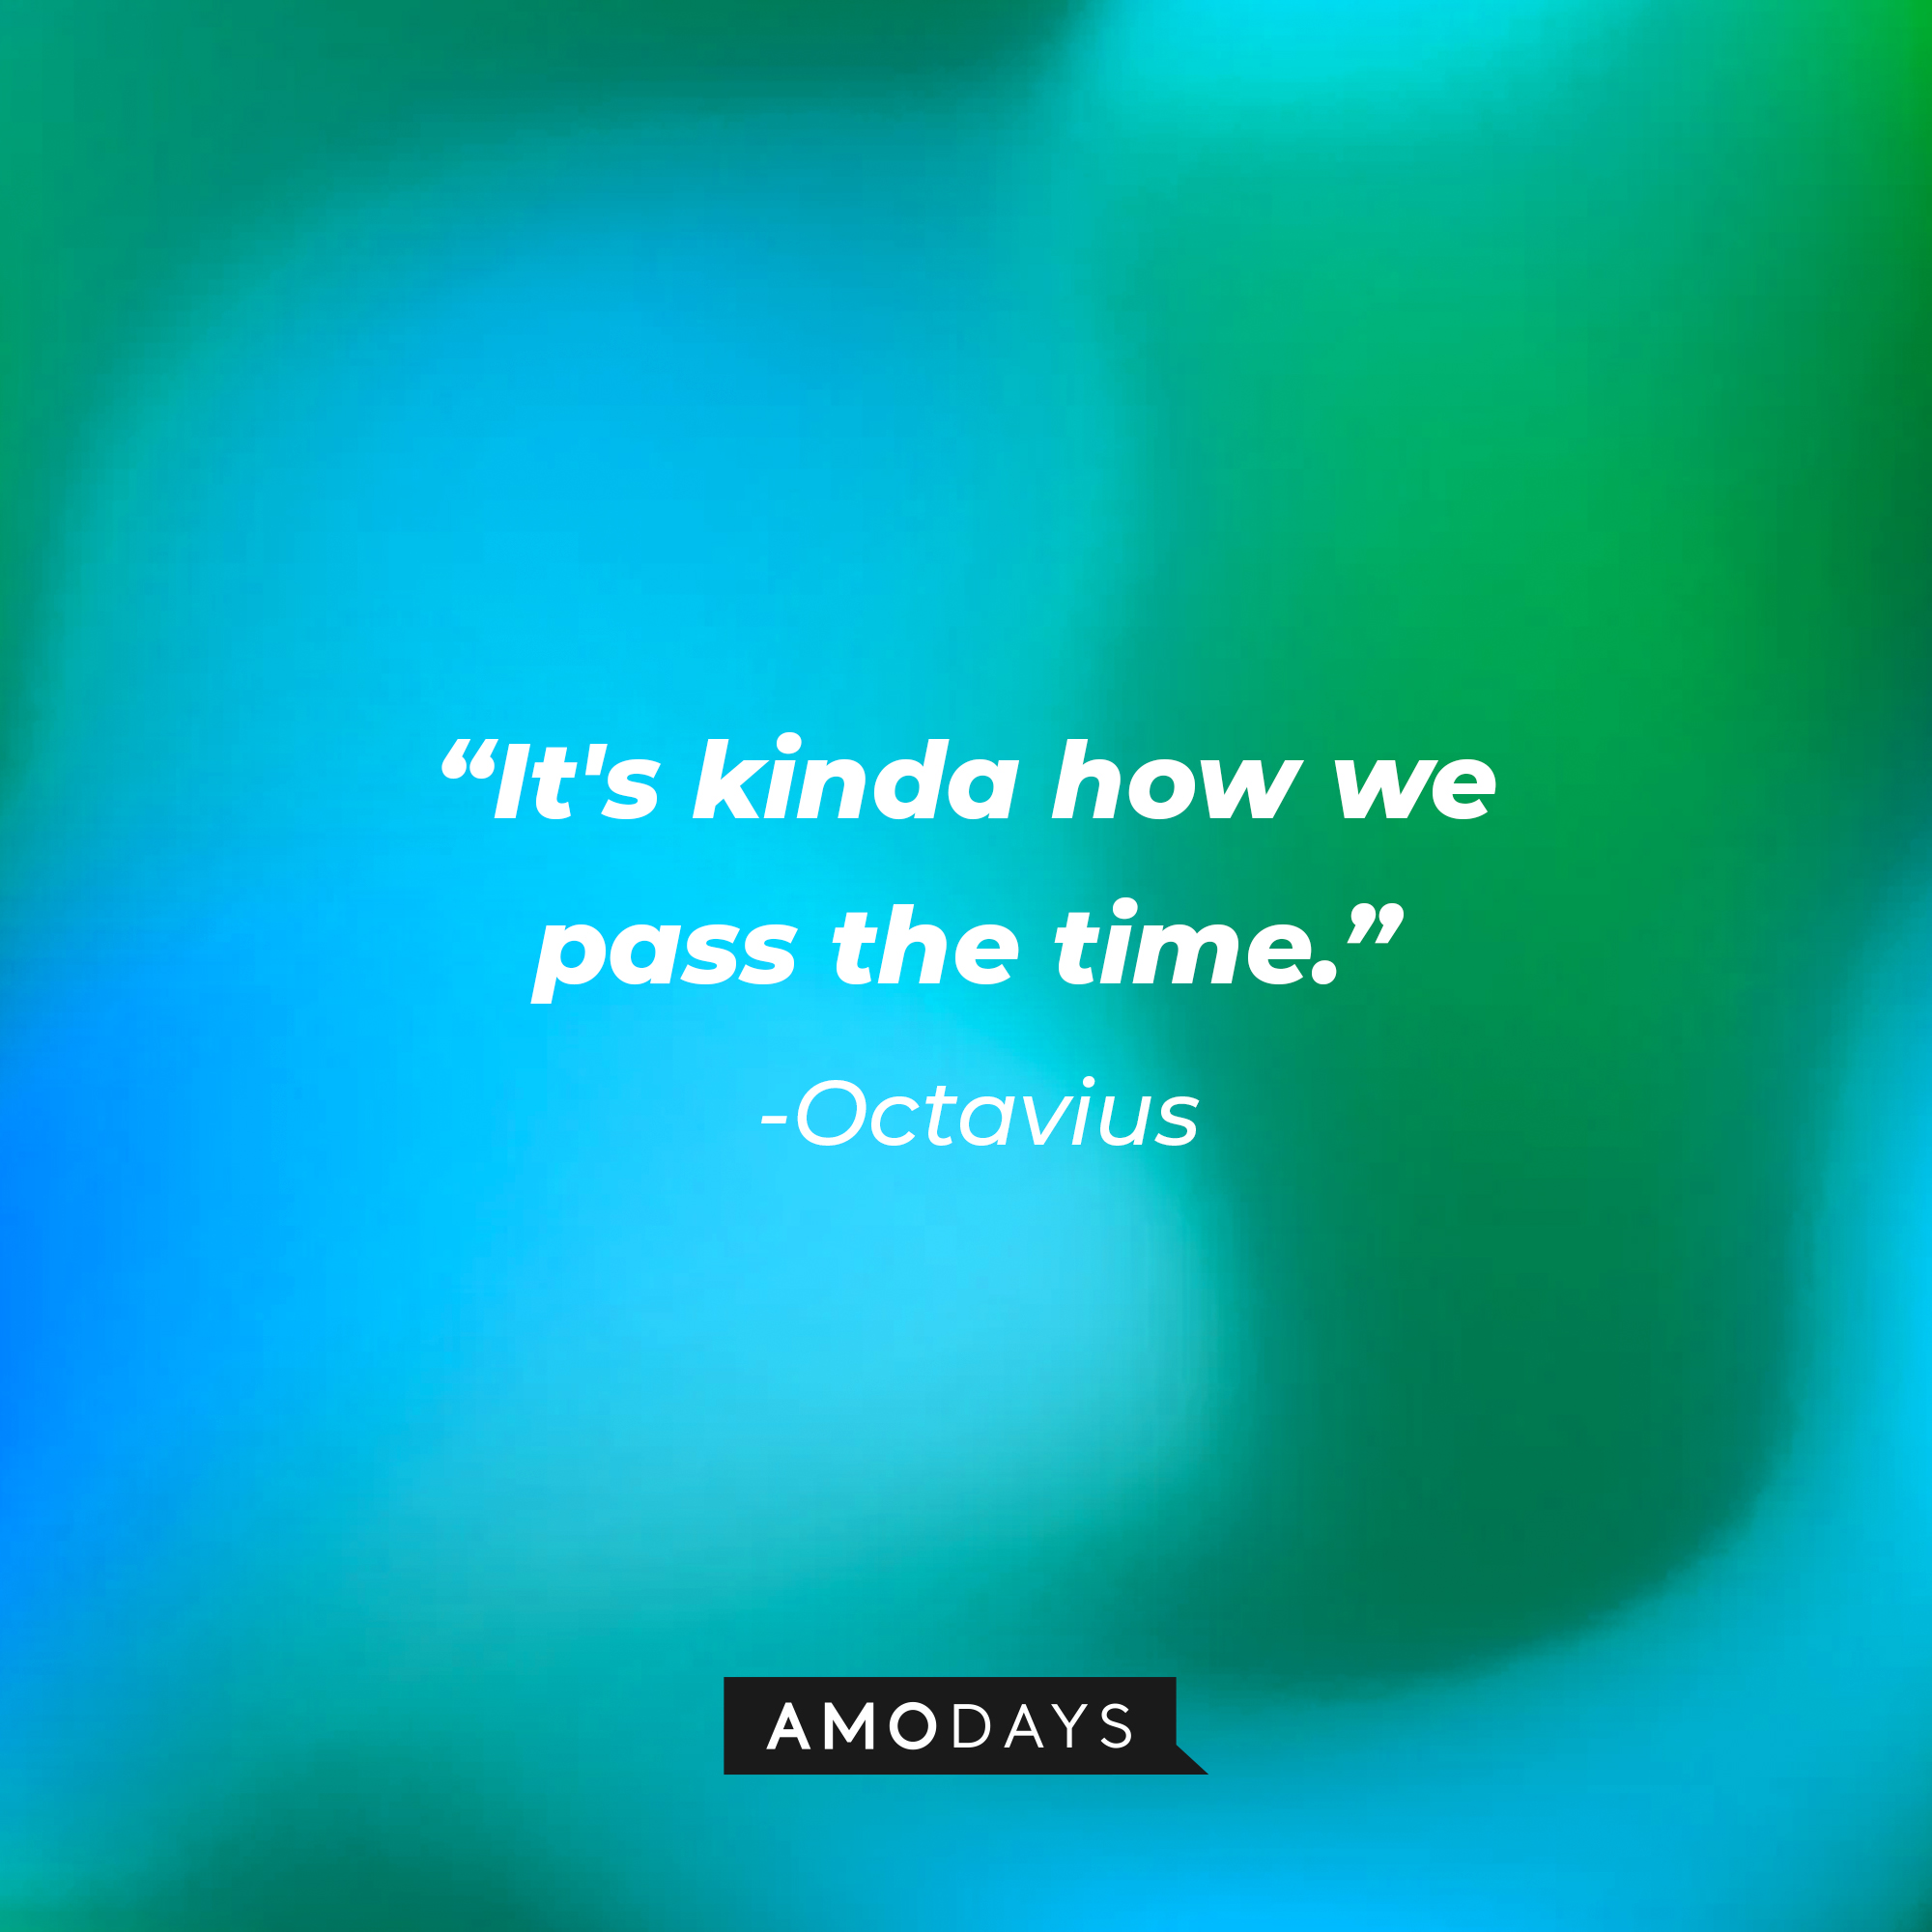 Octavius' quote: “It's kinda how we pass the time.” | Source: Amodays